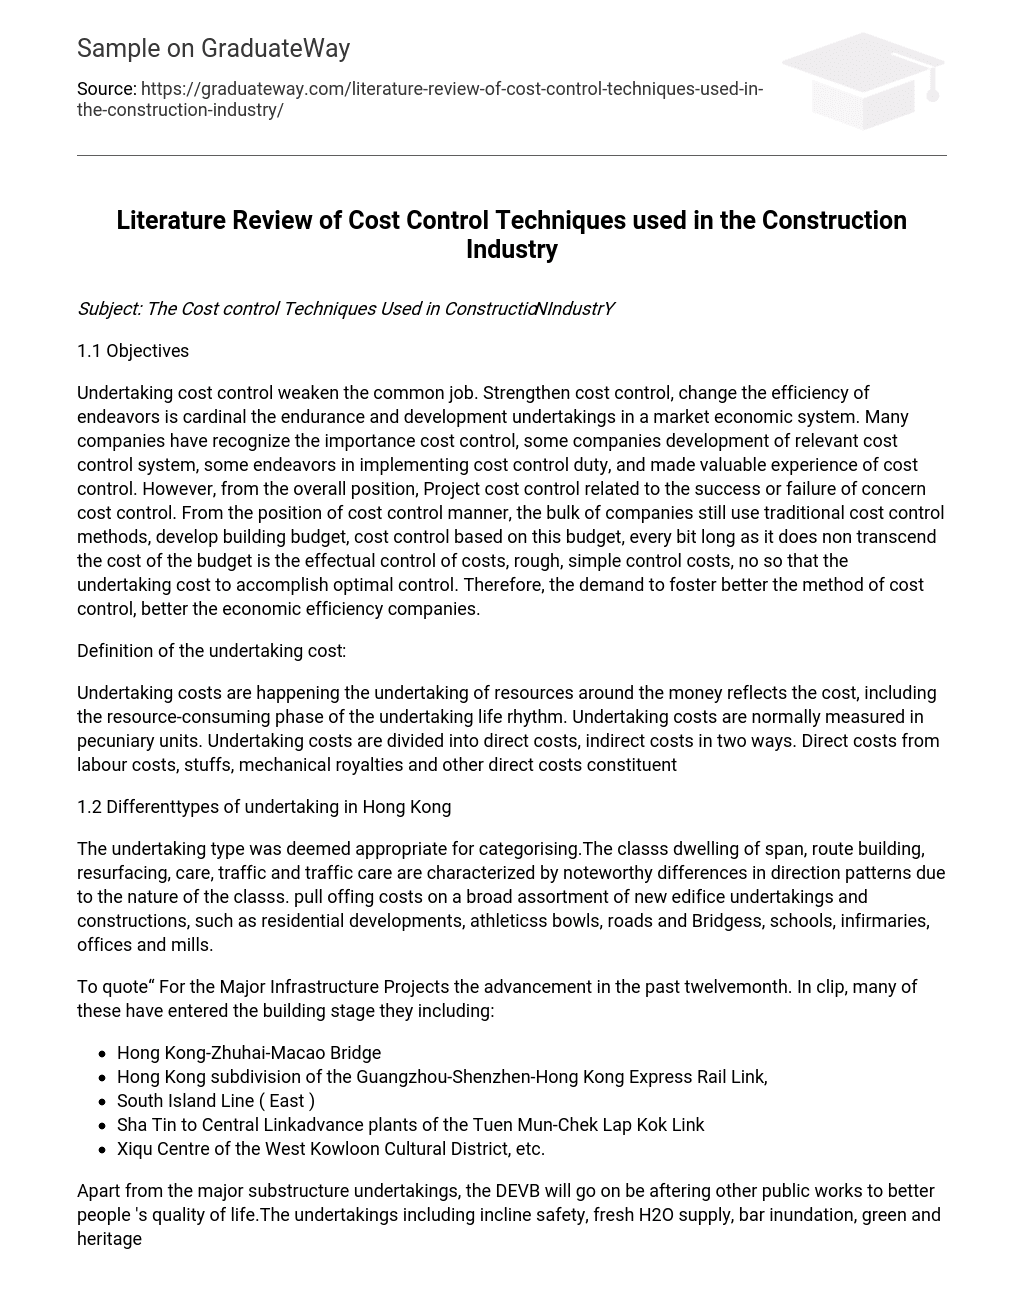 Literature Review of Cost Control Techniques used in the Construction Industry